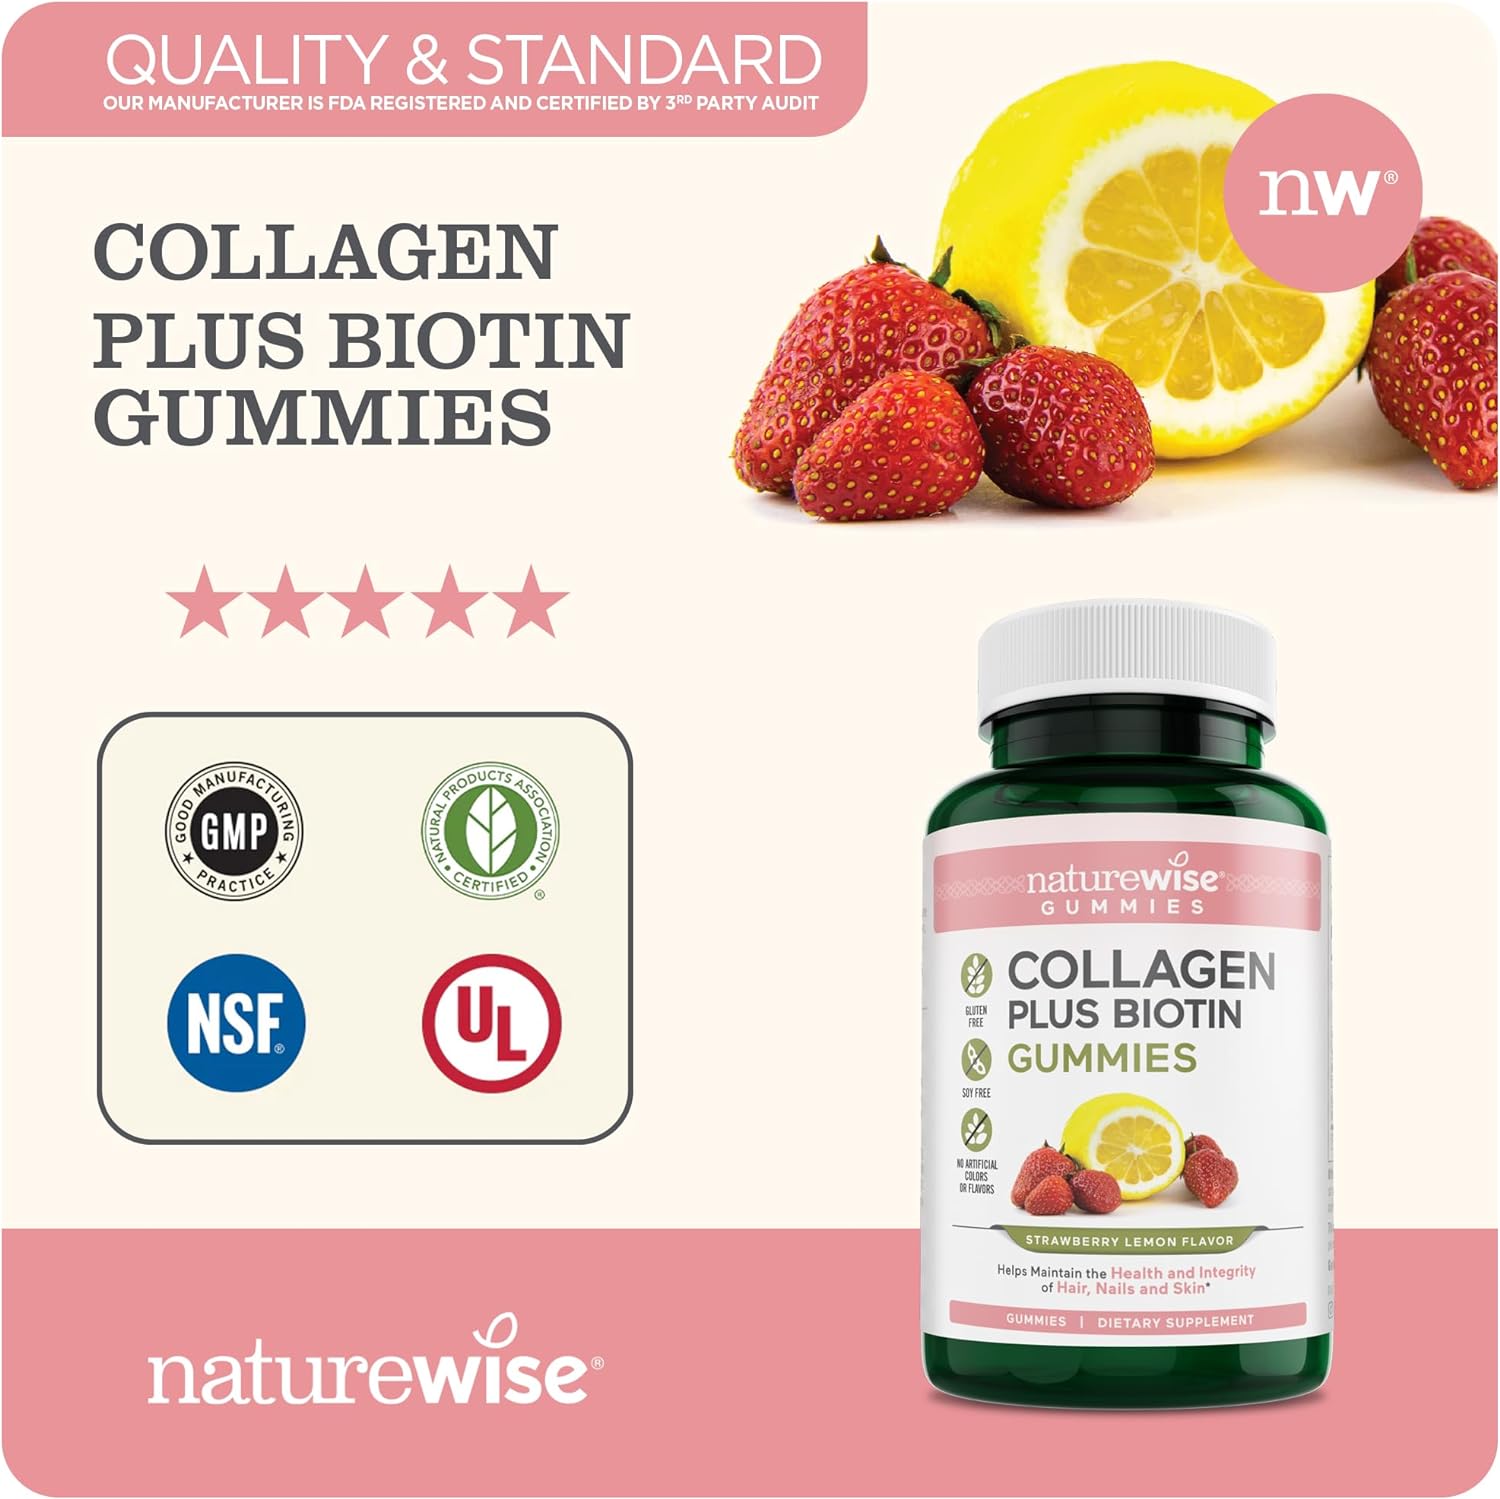 NatureWise Collagen Gummies with Biotin - Strawberry Lemon Flavor Infused with Essential Beauty Supplements for Skin, Hair, & Joint Support Like Vitamin E, Vitamin C, Zinc | 1-Month Supply, 60 Count